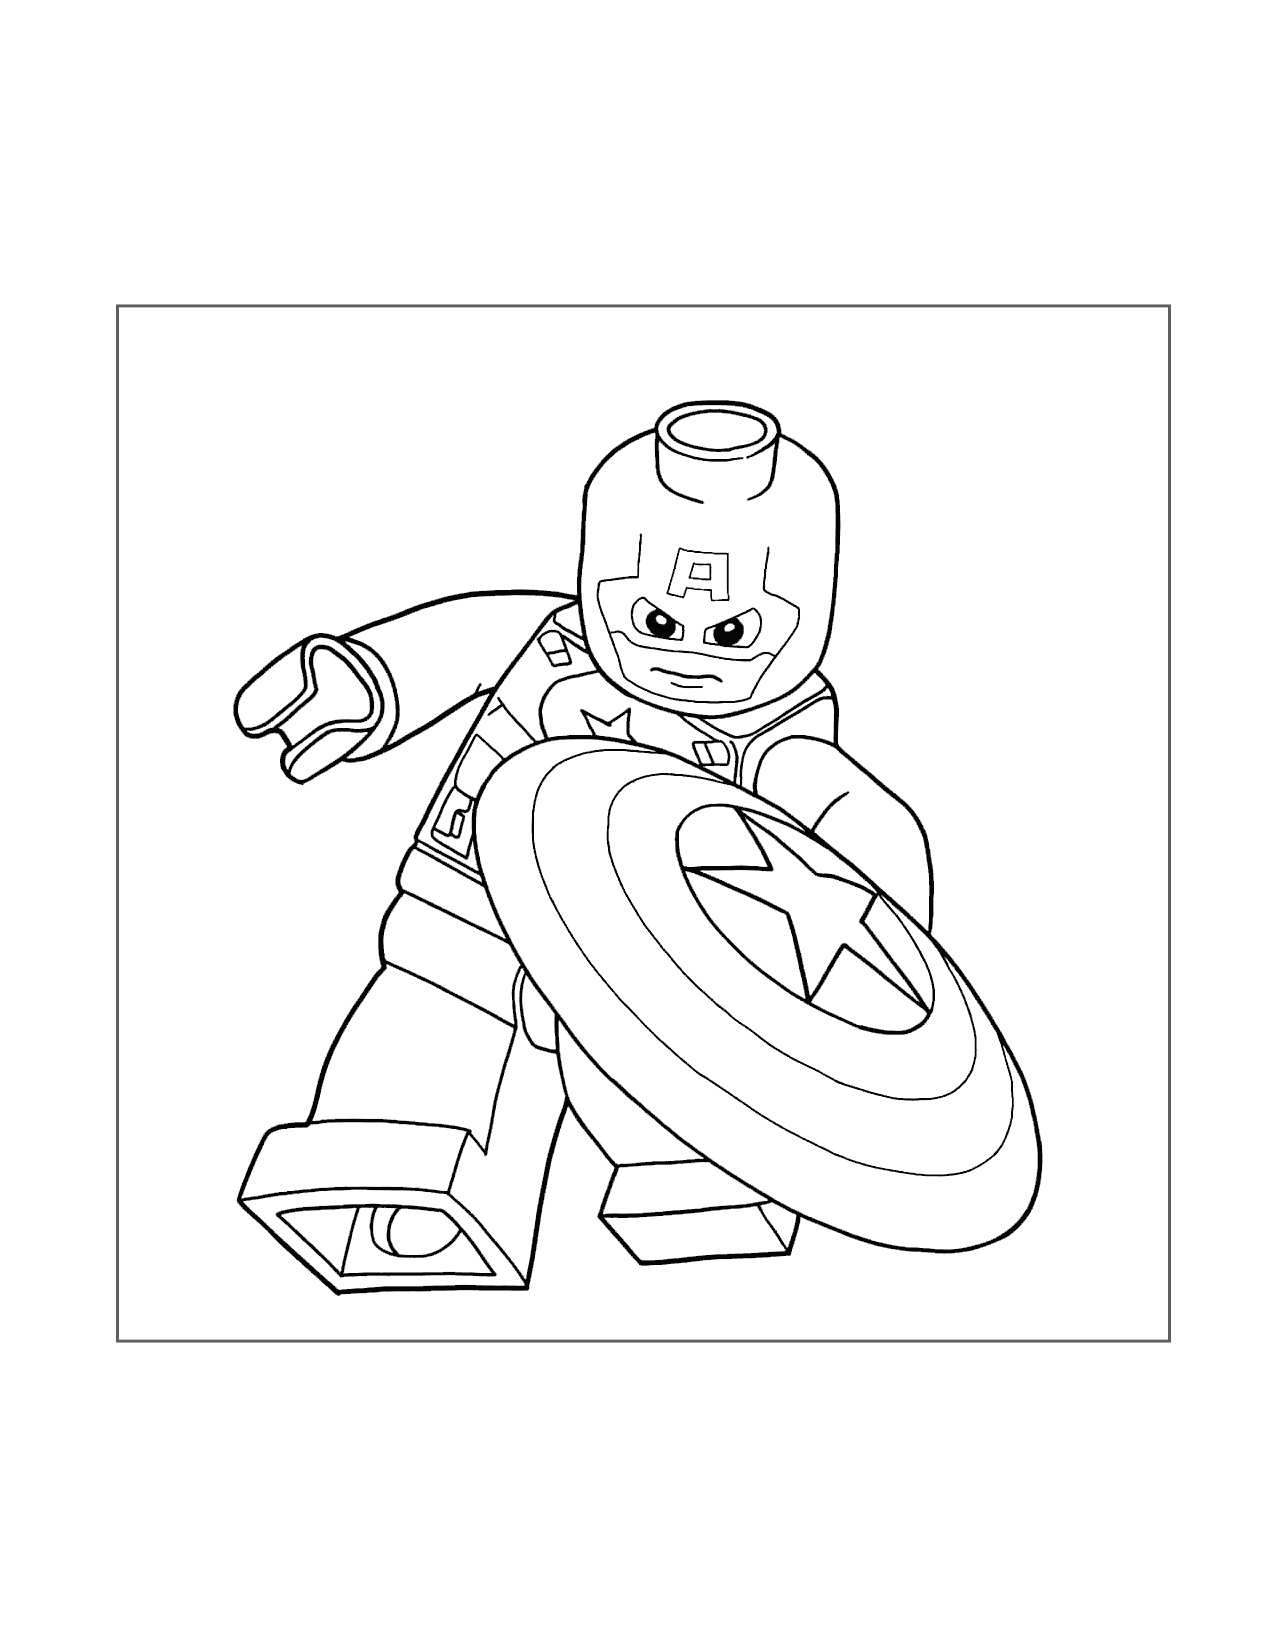 Lego Avenger Captain America Coloring Page